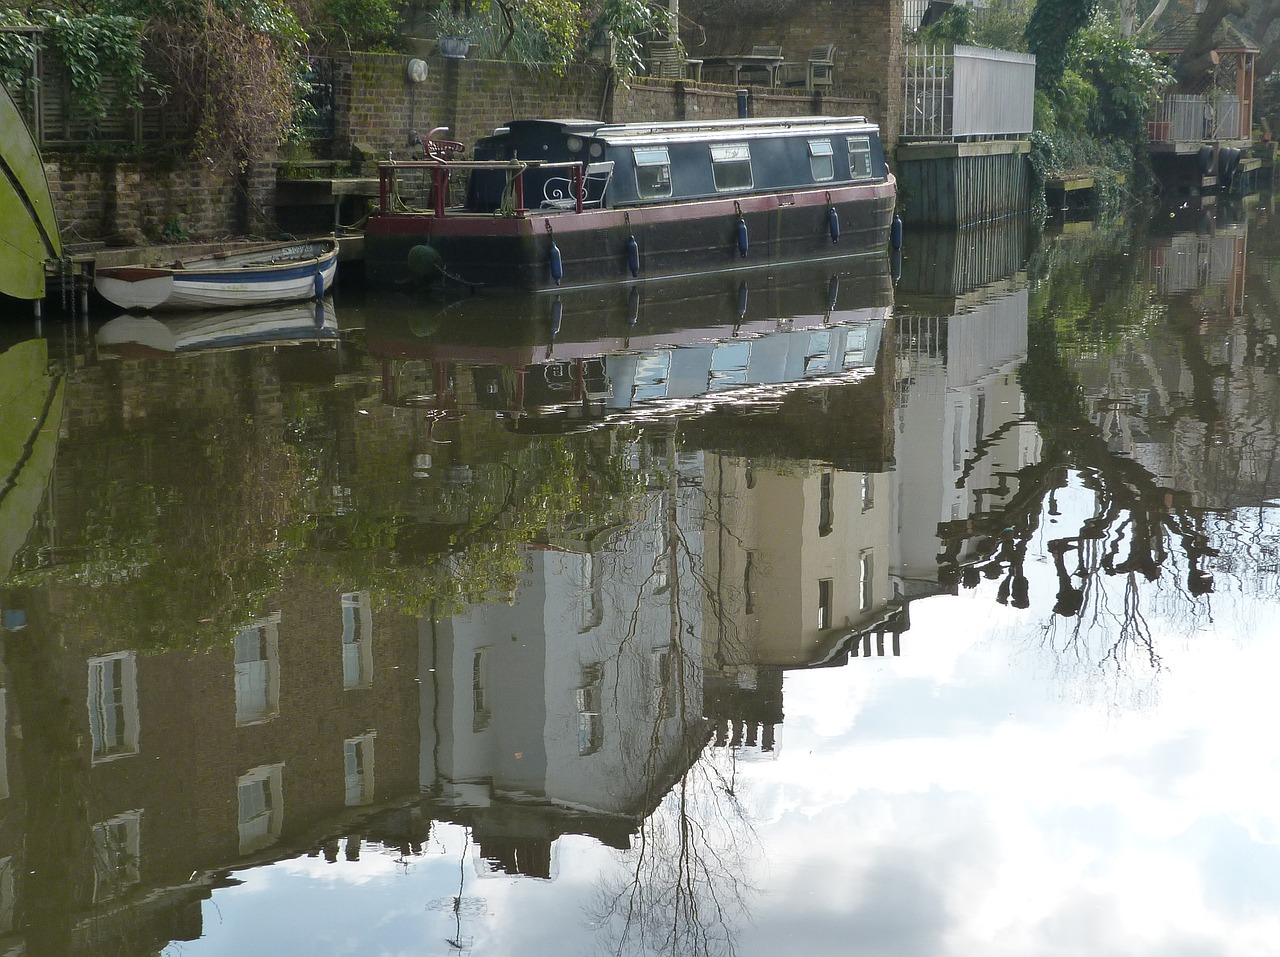 camden town canal boats free photo